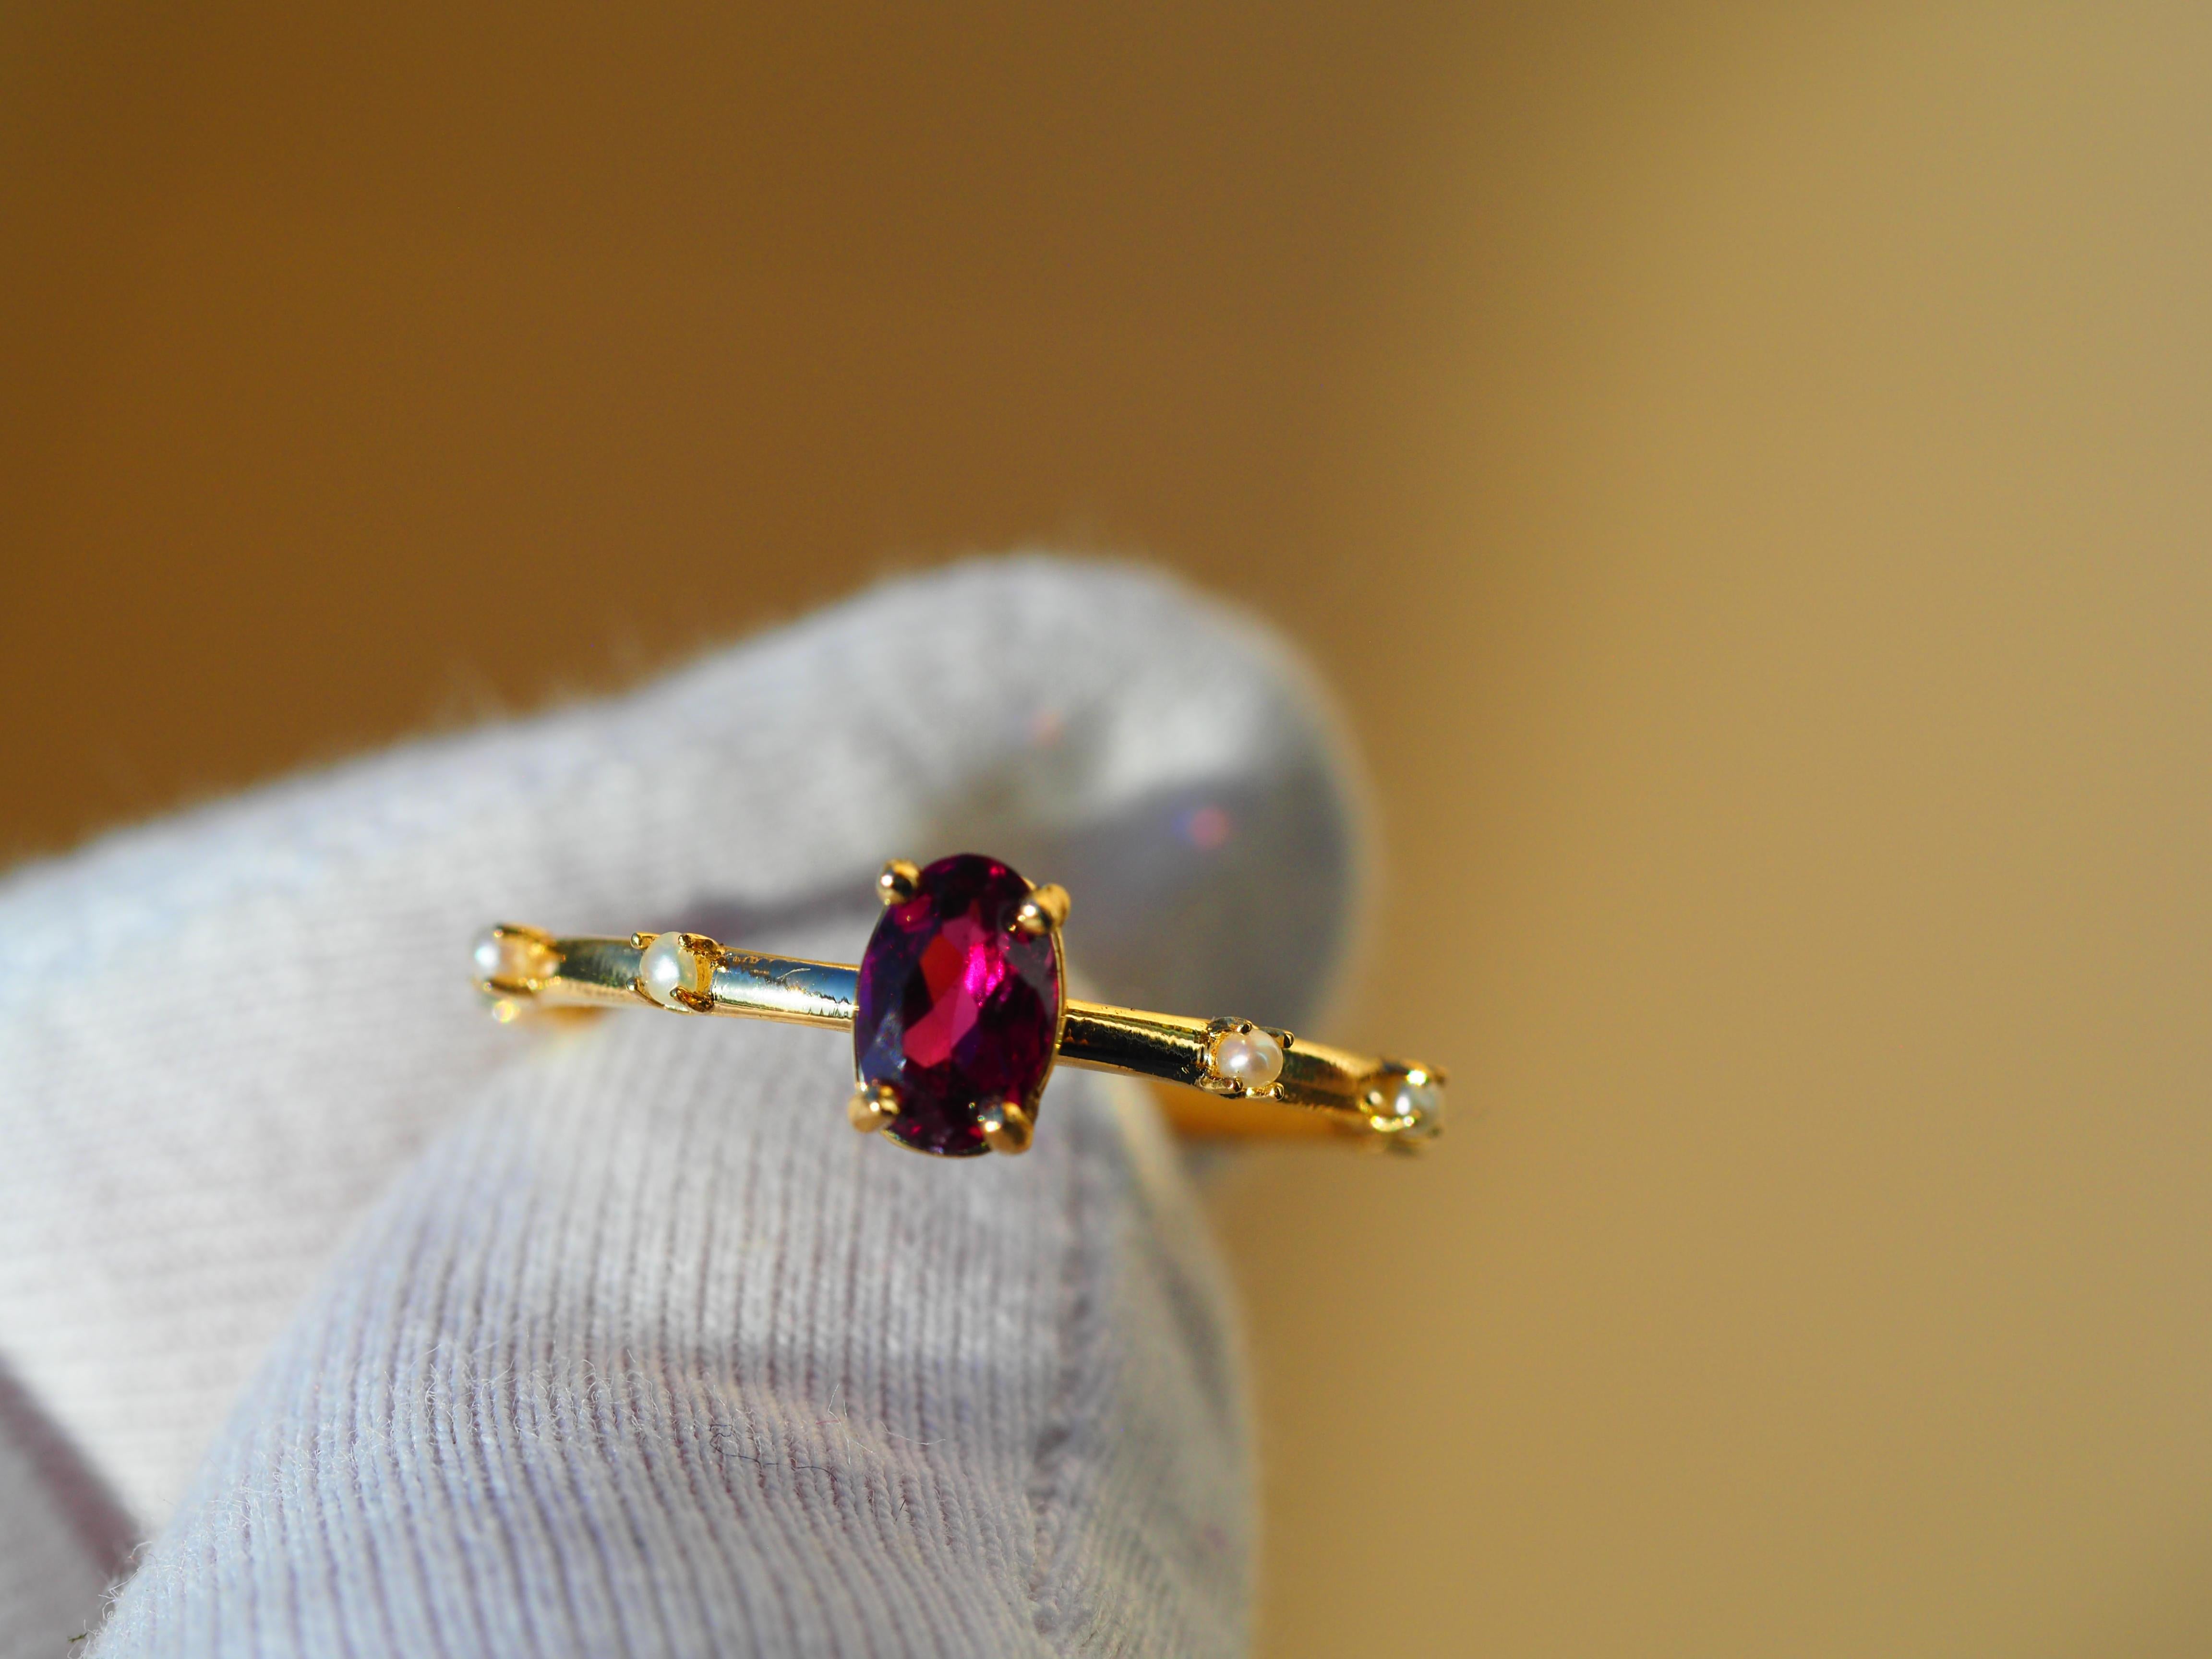 For Sale:  Garnet and pearls 14k gold ring. Eternity ring 14